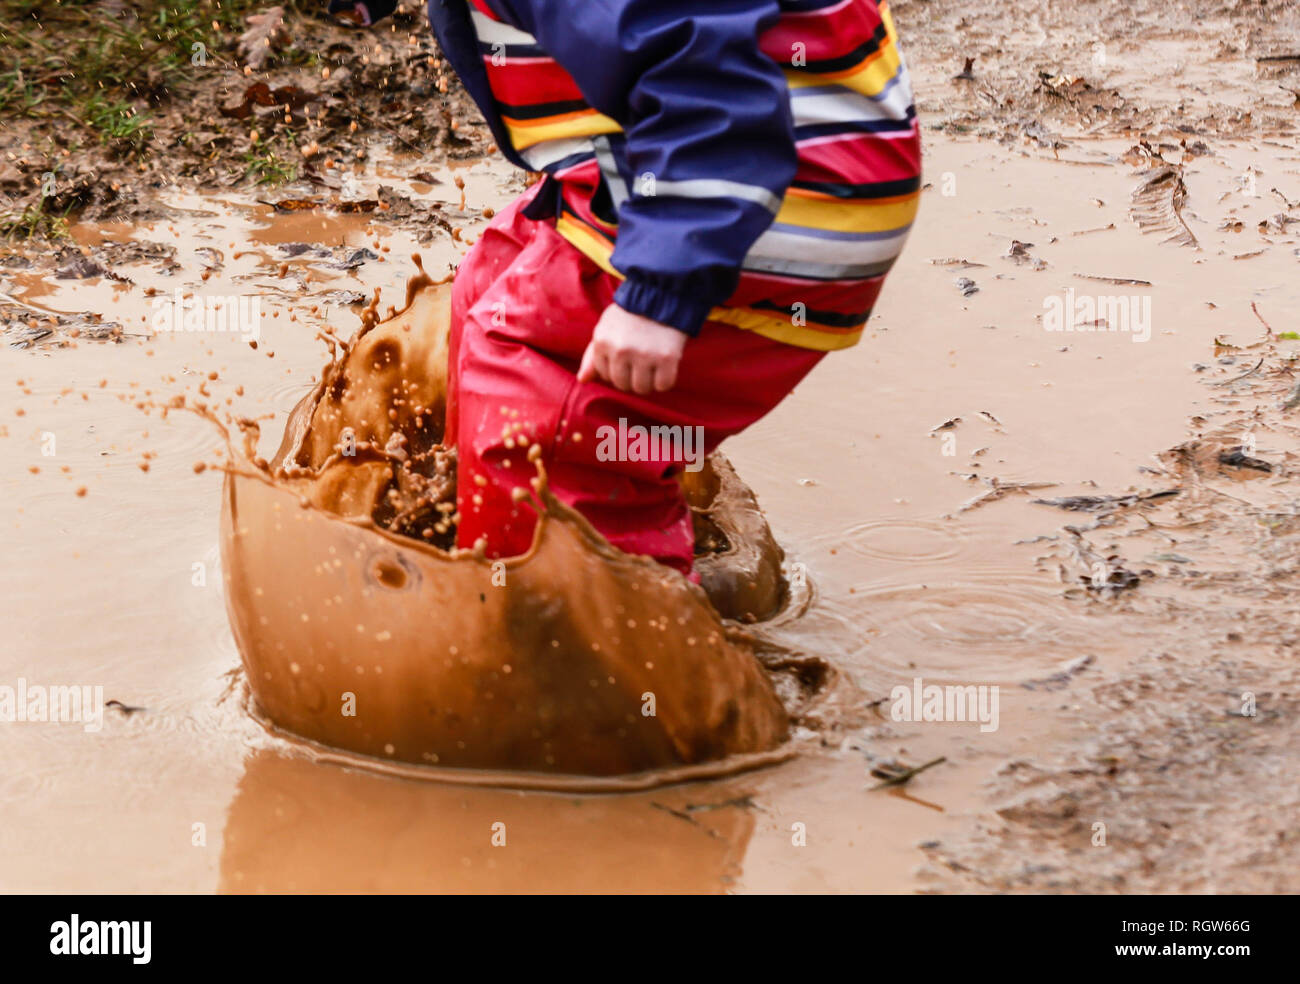 Young child playing in muddy puddle in wellies Stock Photo